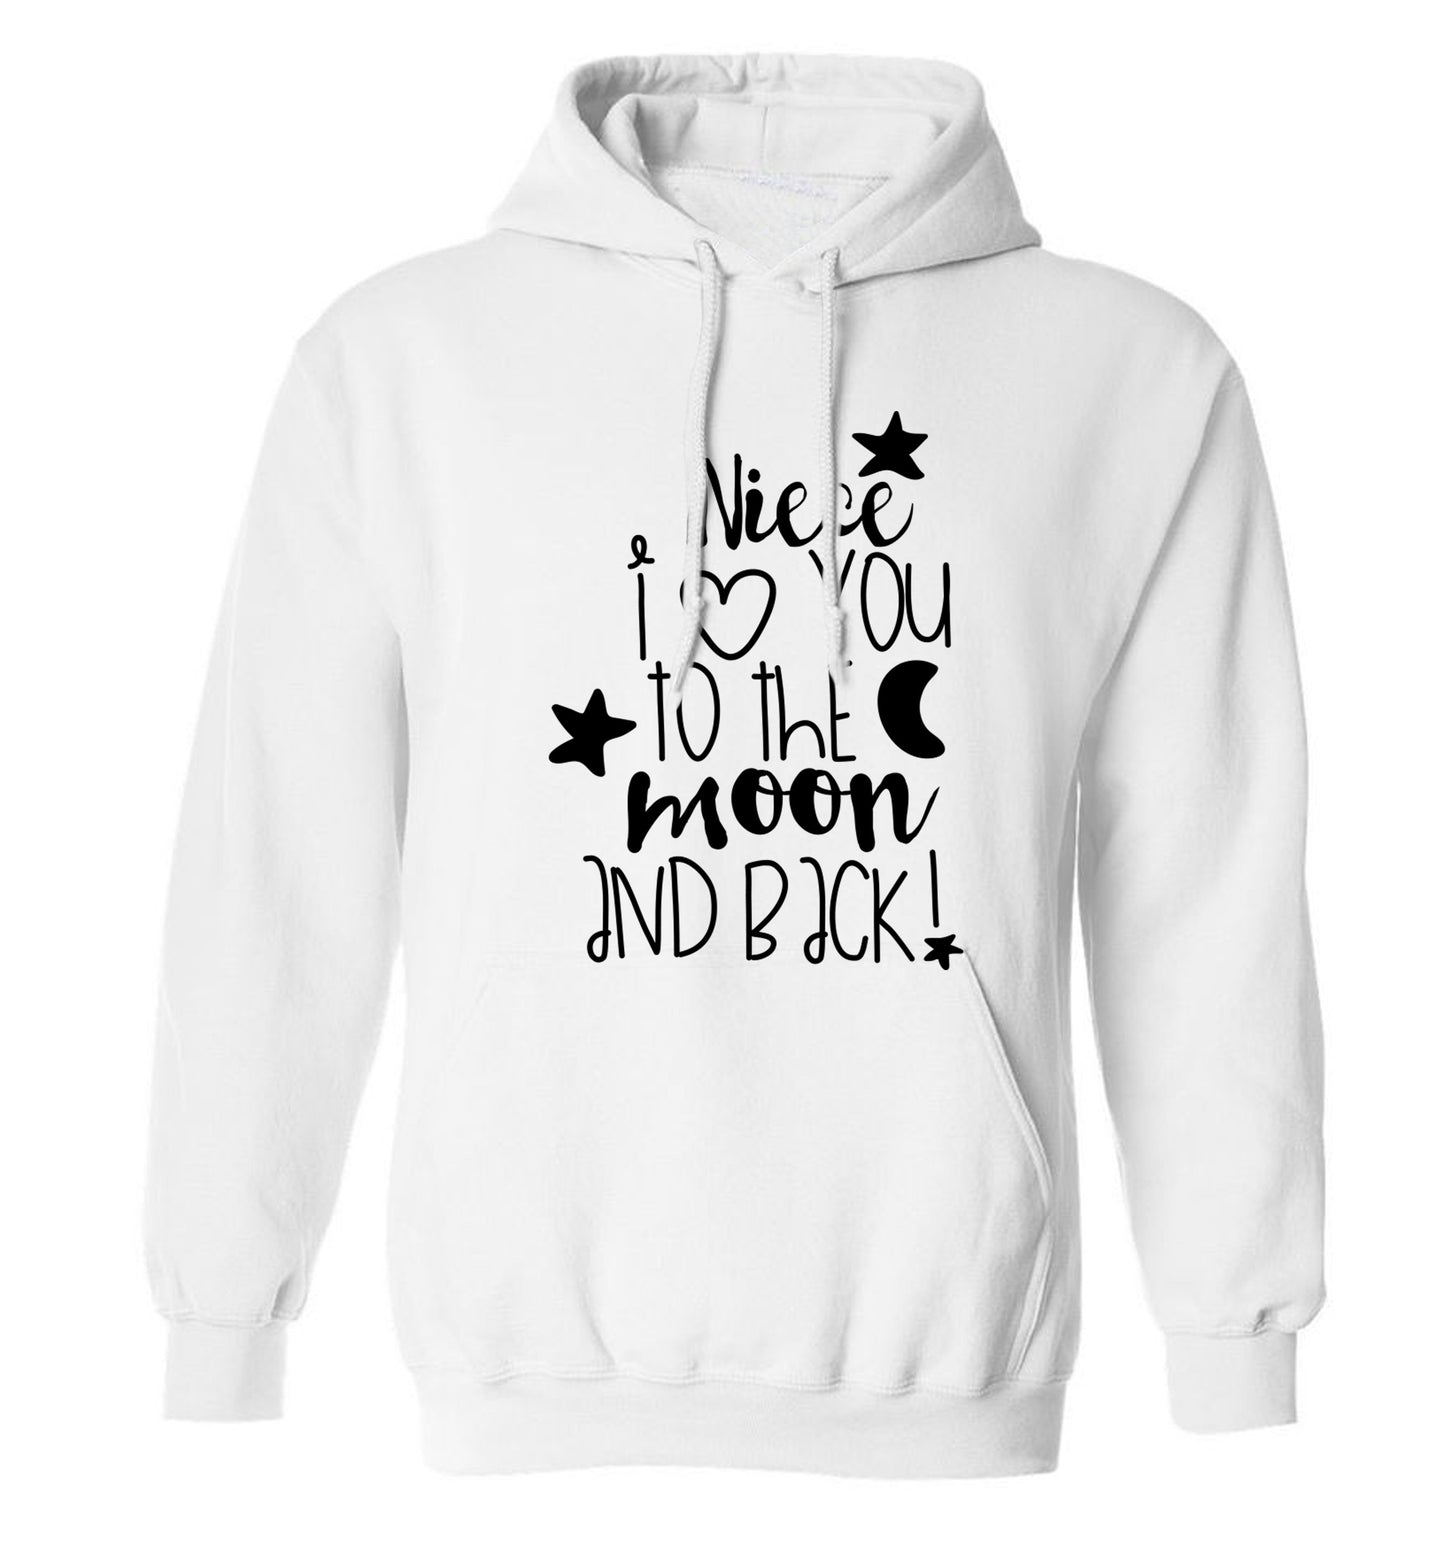 Niece I love you to the moon and back adults unisex white hoodie 2XL